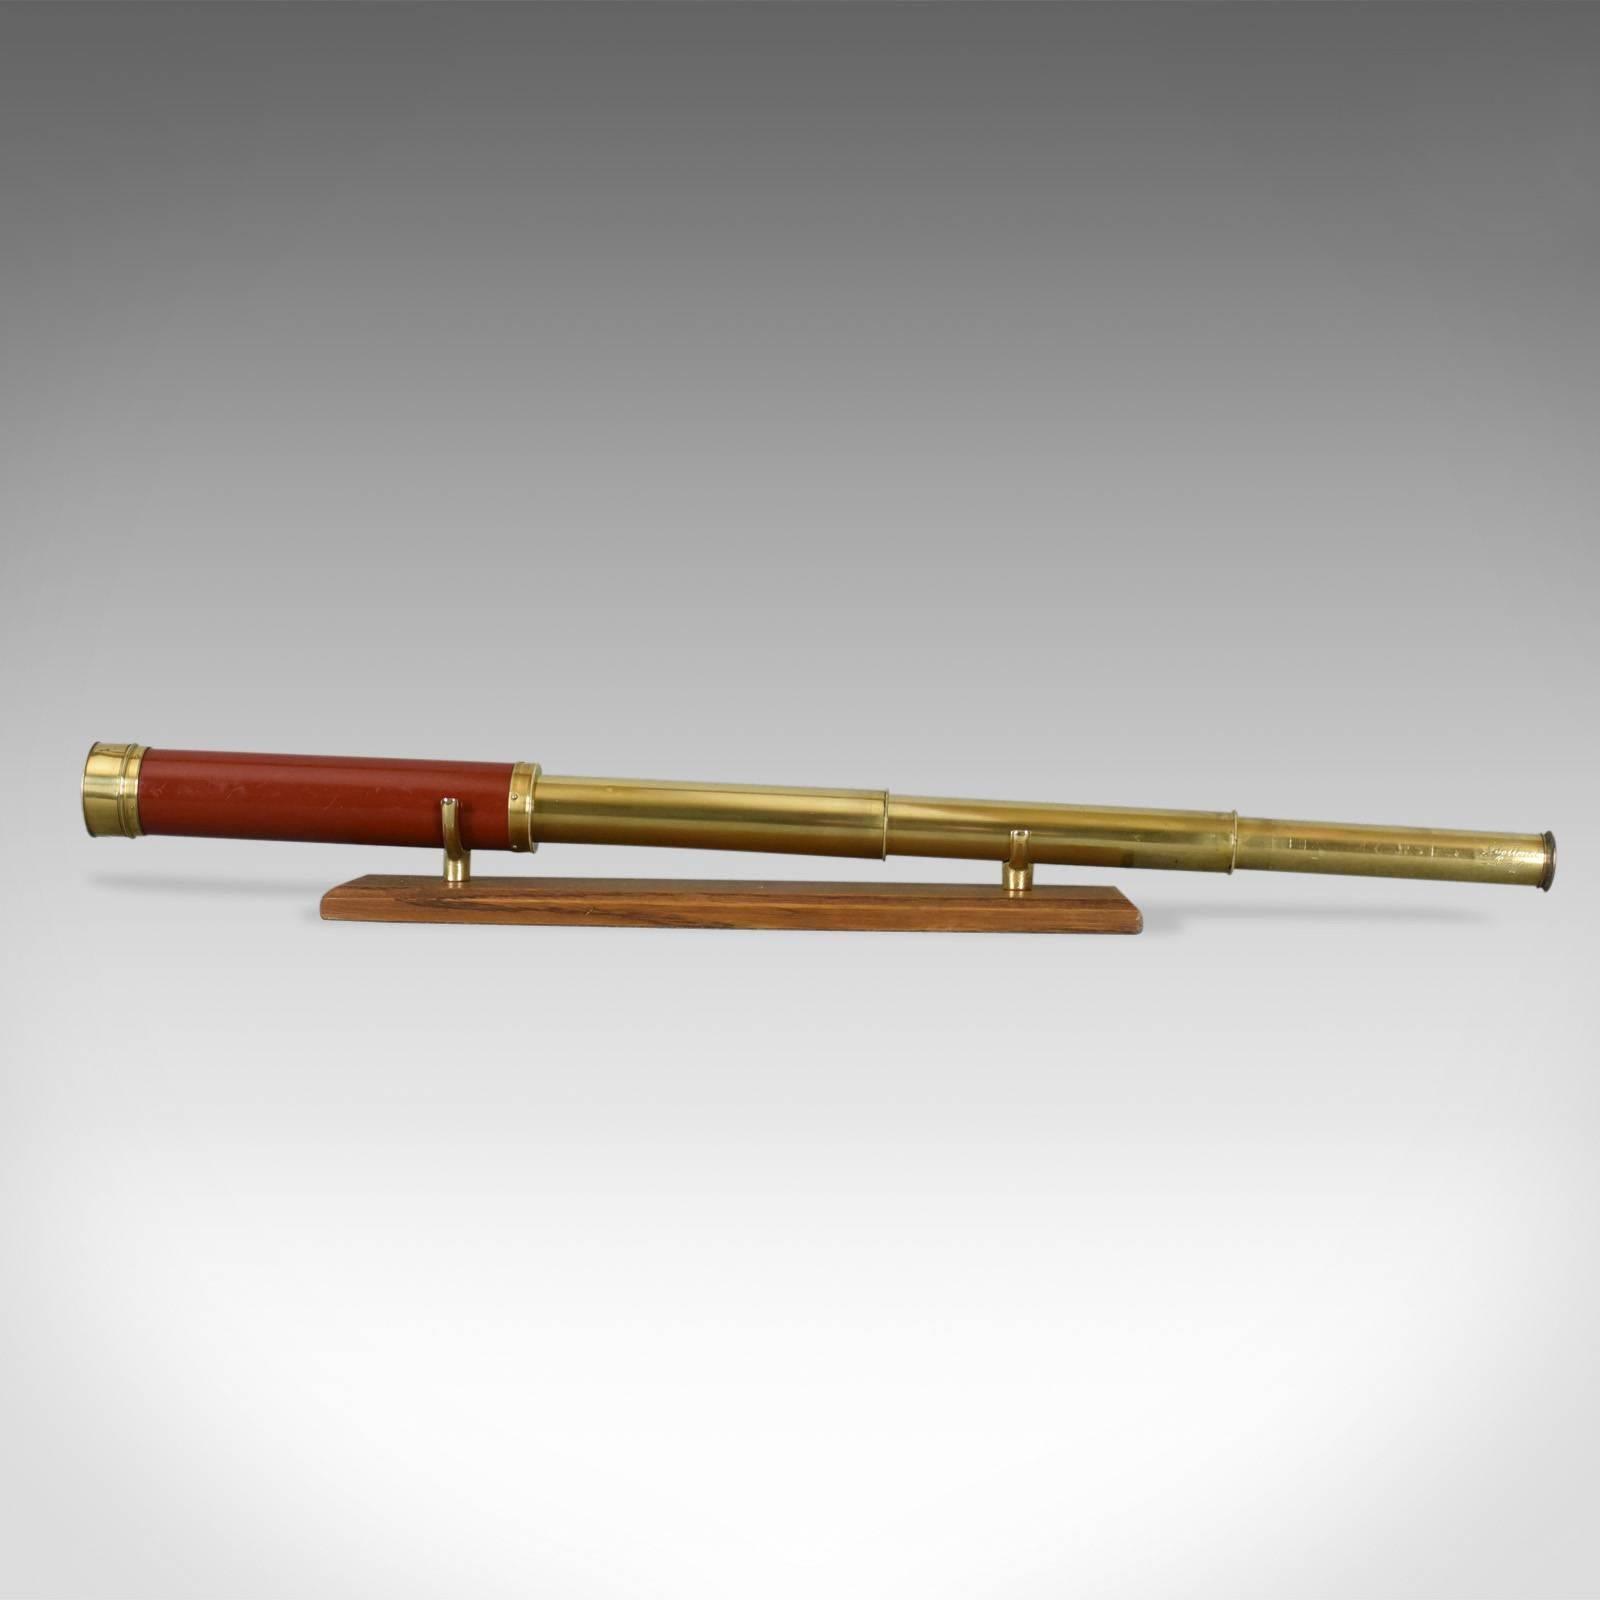 This is an antique telescope, a three-draw refractor for terrestrial or astronomical use. An English Georgian piece dating to circa 1800.

Perfect for bird watching, landscape appreciation, wildlife, or maritime observation. Equally suitable for